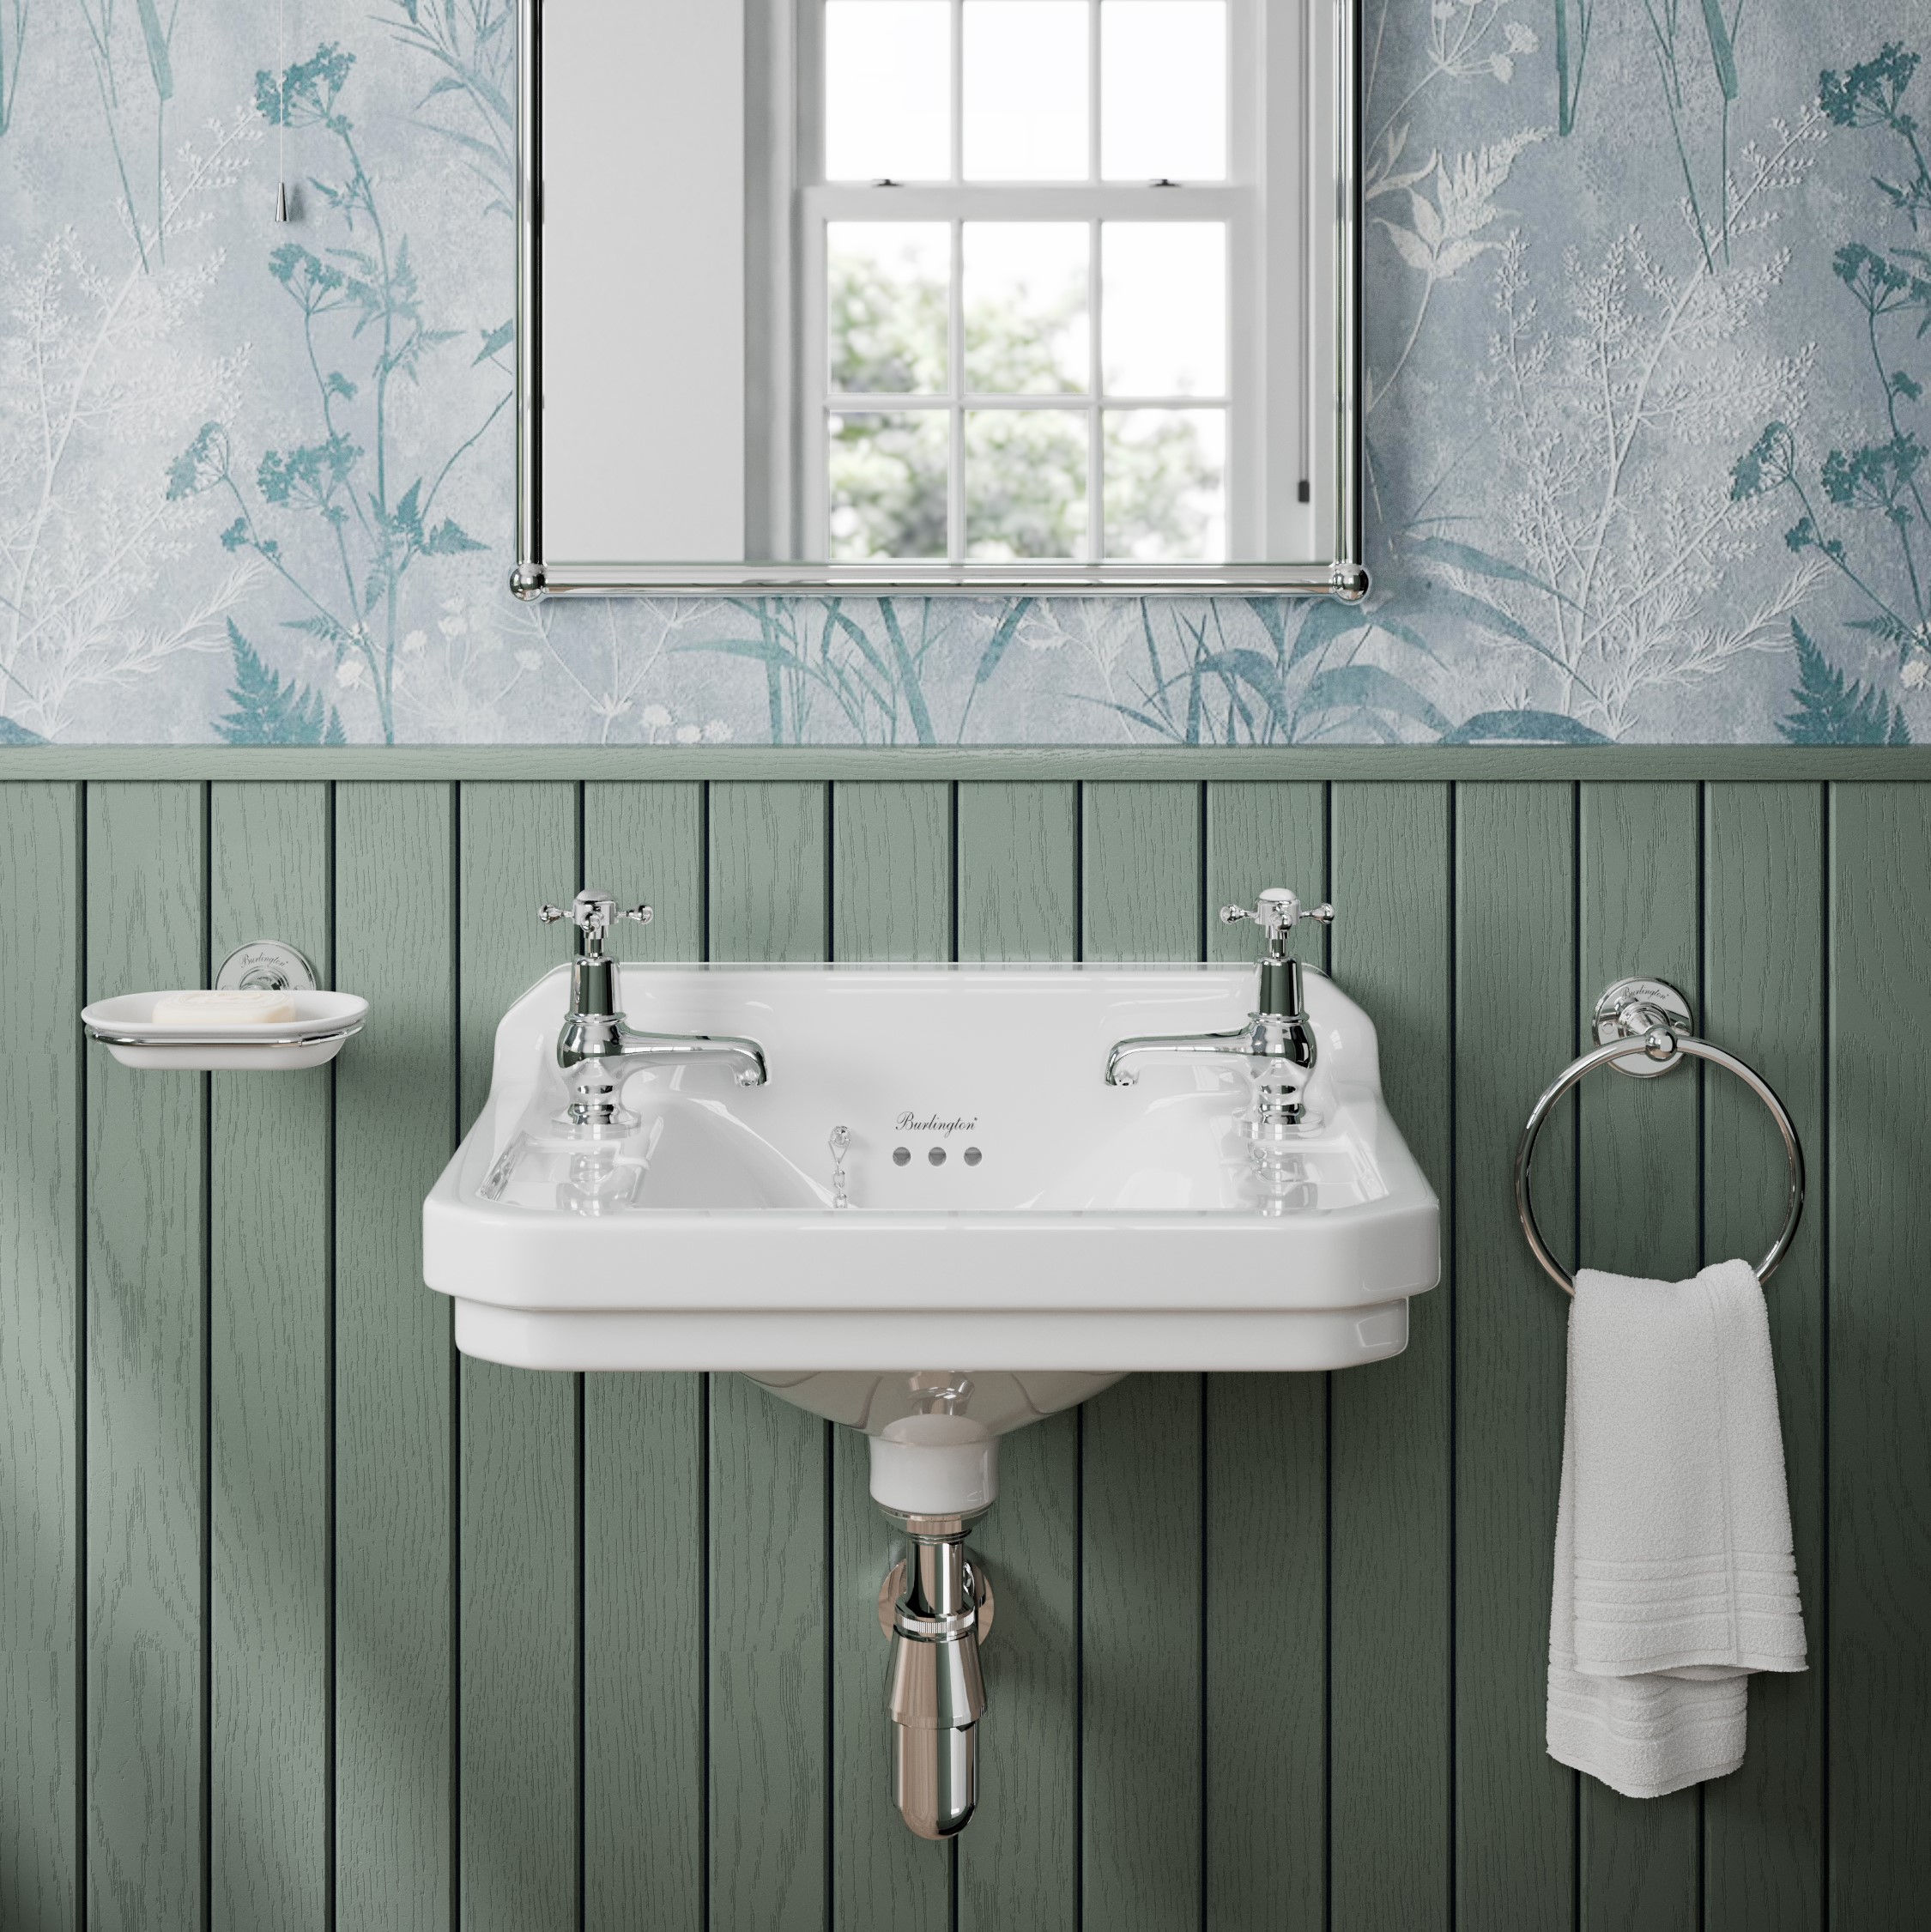 Make The Most of Your Cloakroom with These Small Traditional Bathroom Ideas  | Burlington Bathrooms | Burlington Bathrooms